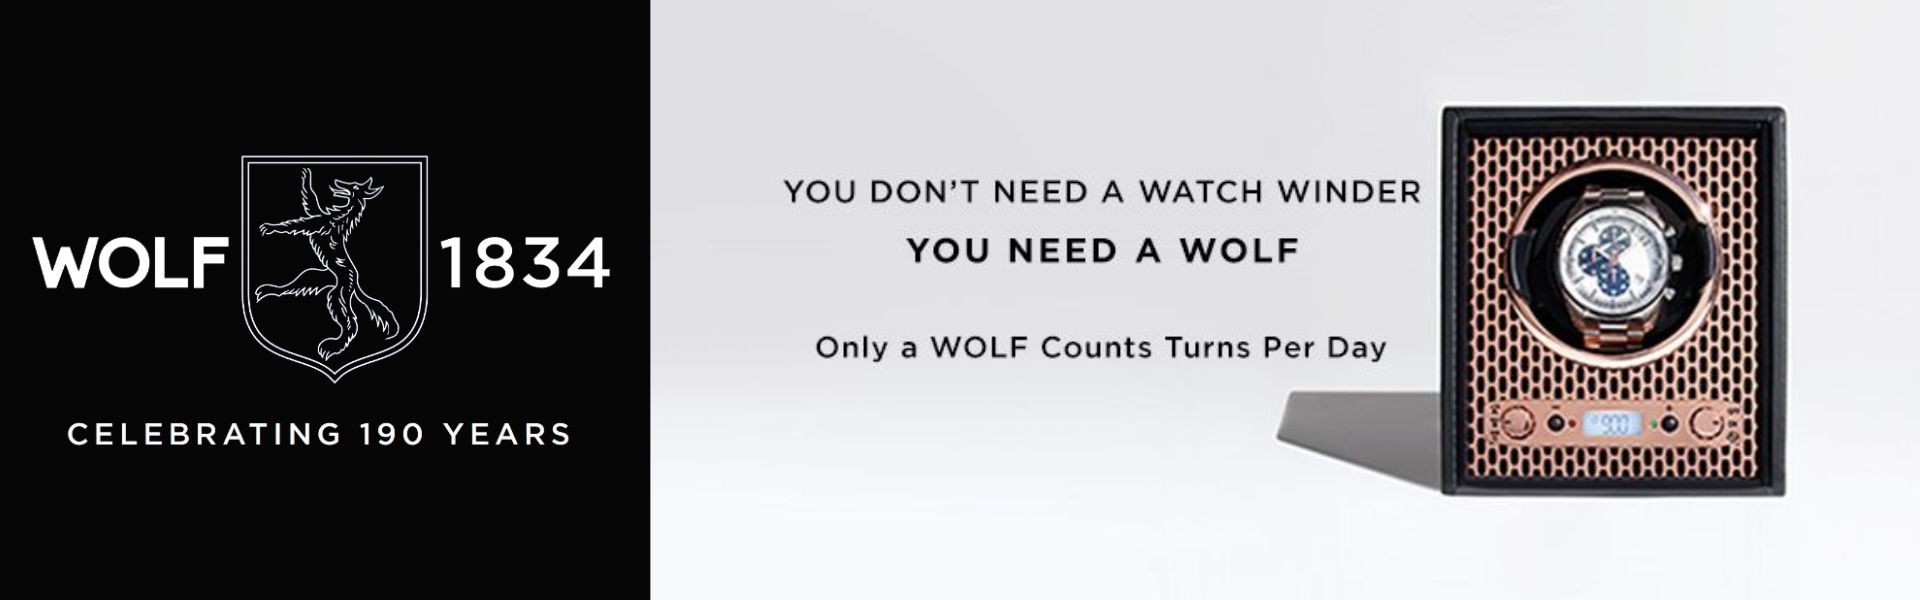 All WOLF